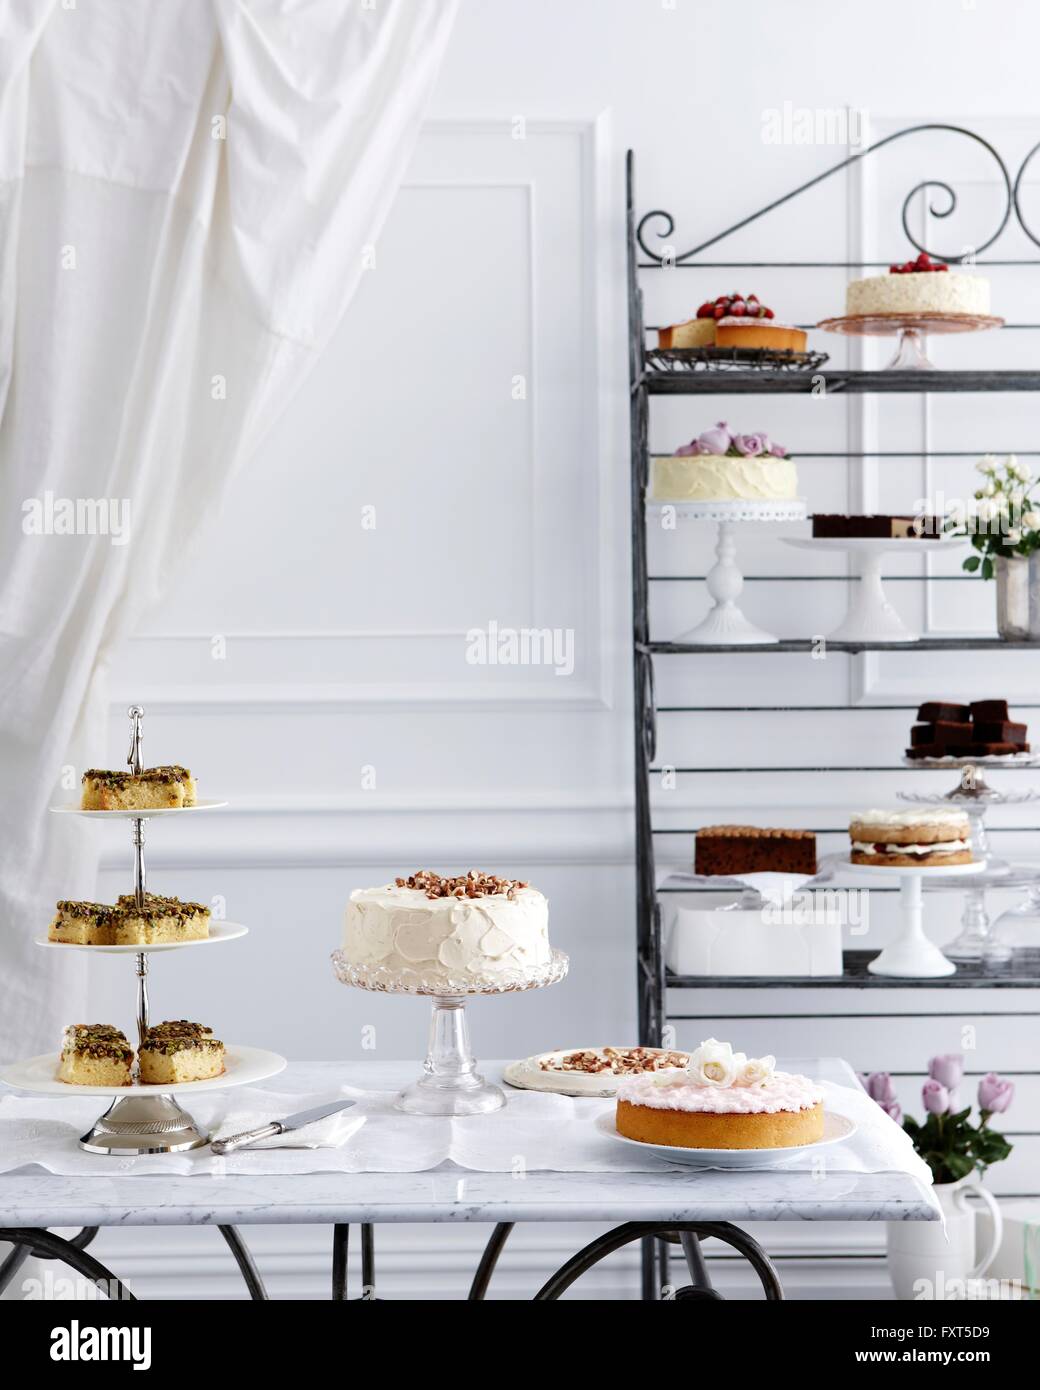 Selection of cakes on traditional tea table and stand Stock Photo